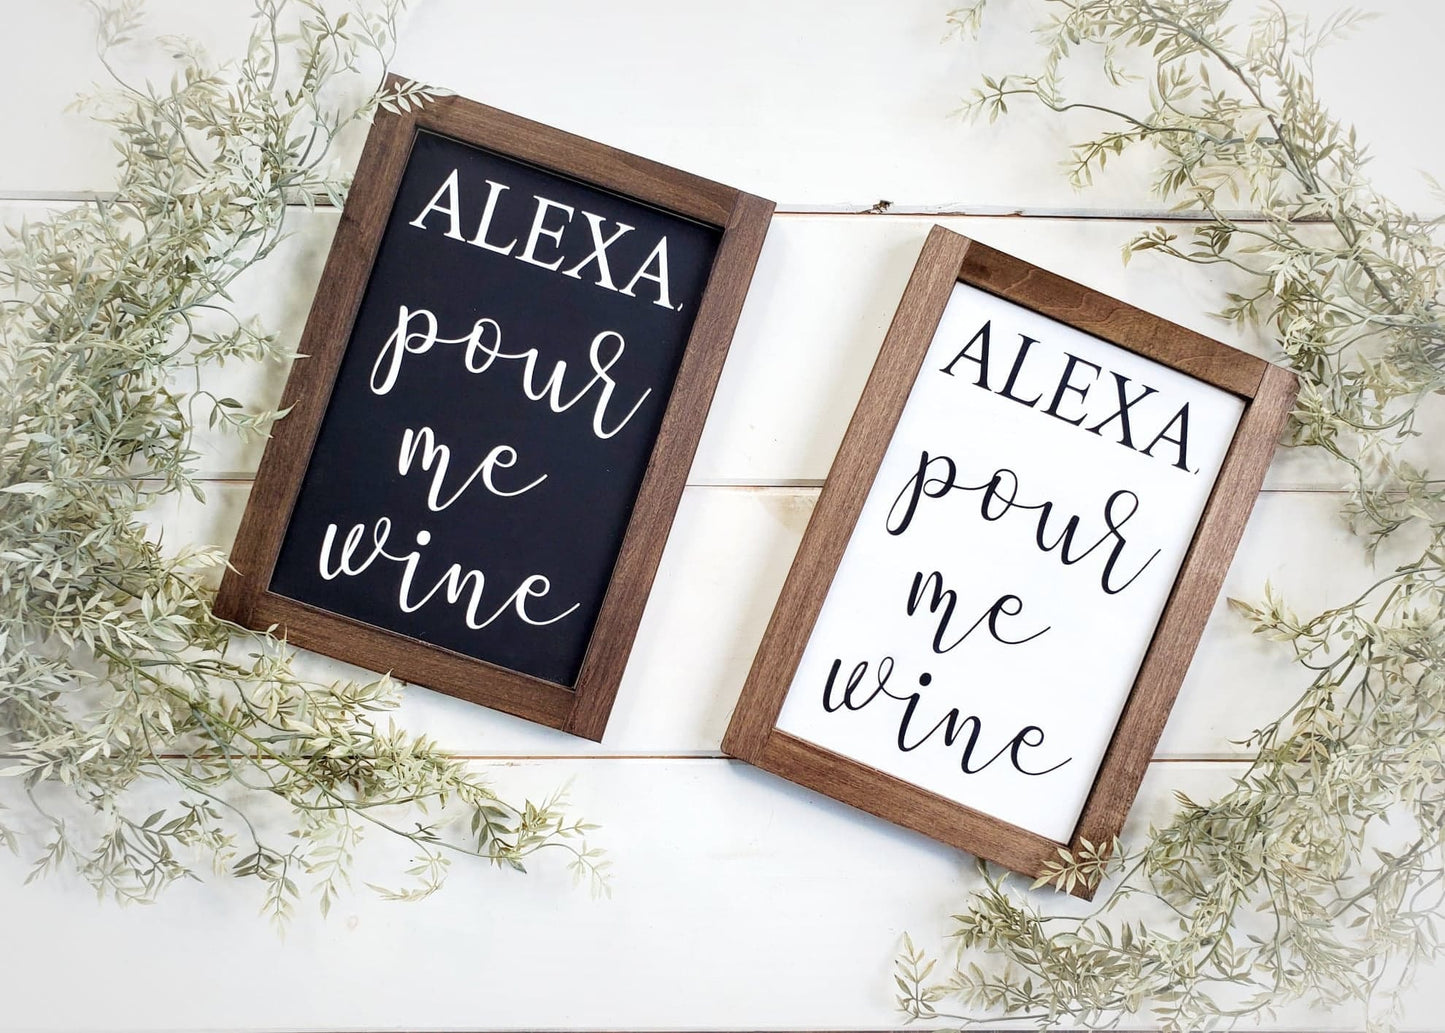 Alexa pour me wine, Alexa sign, wine sing, funny wine sign, drinking sign,